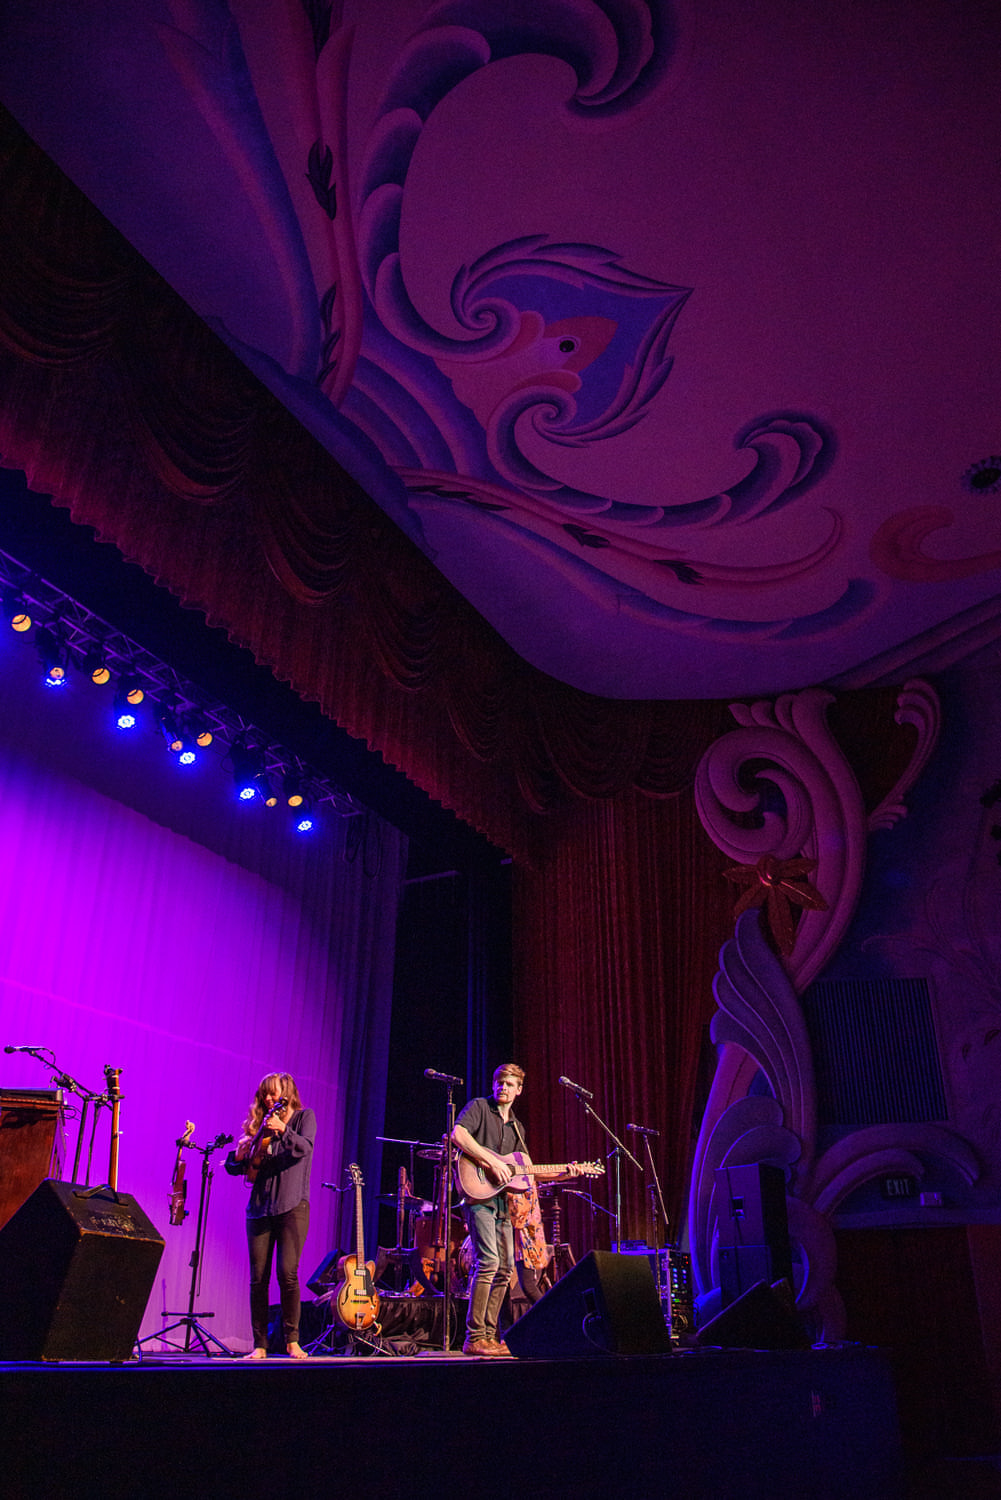 The Hunts performing at the Midwest Theater on September 13, 2018.